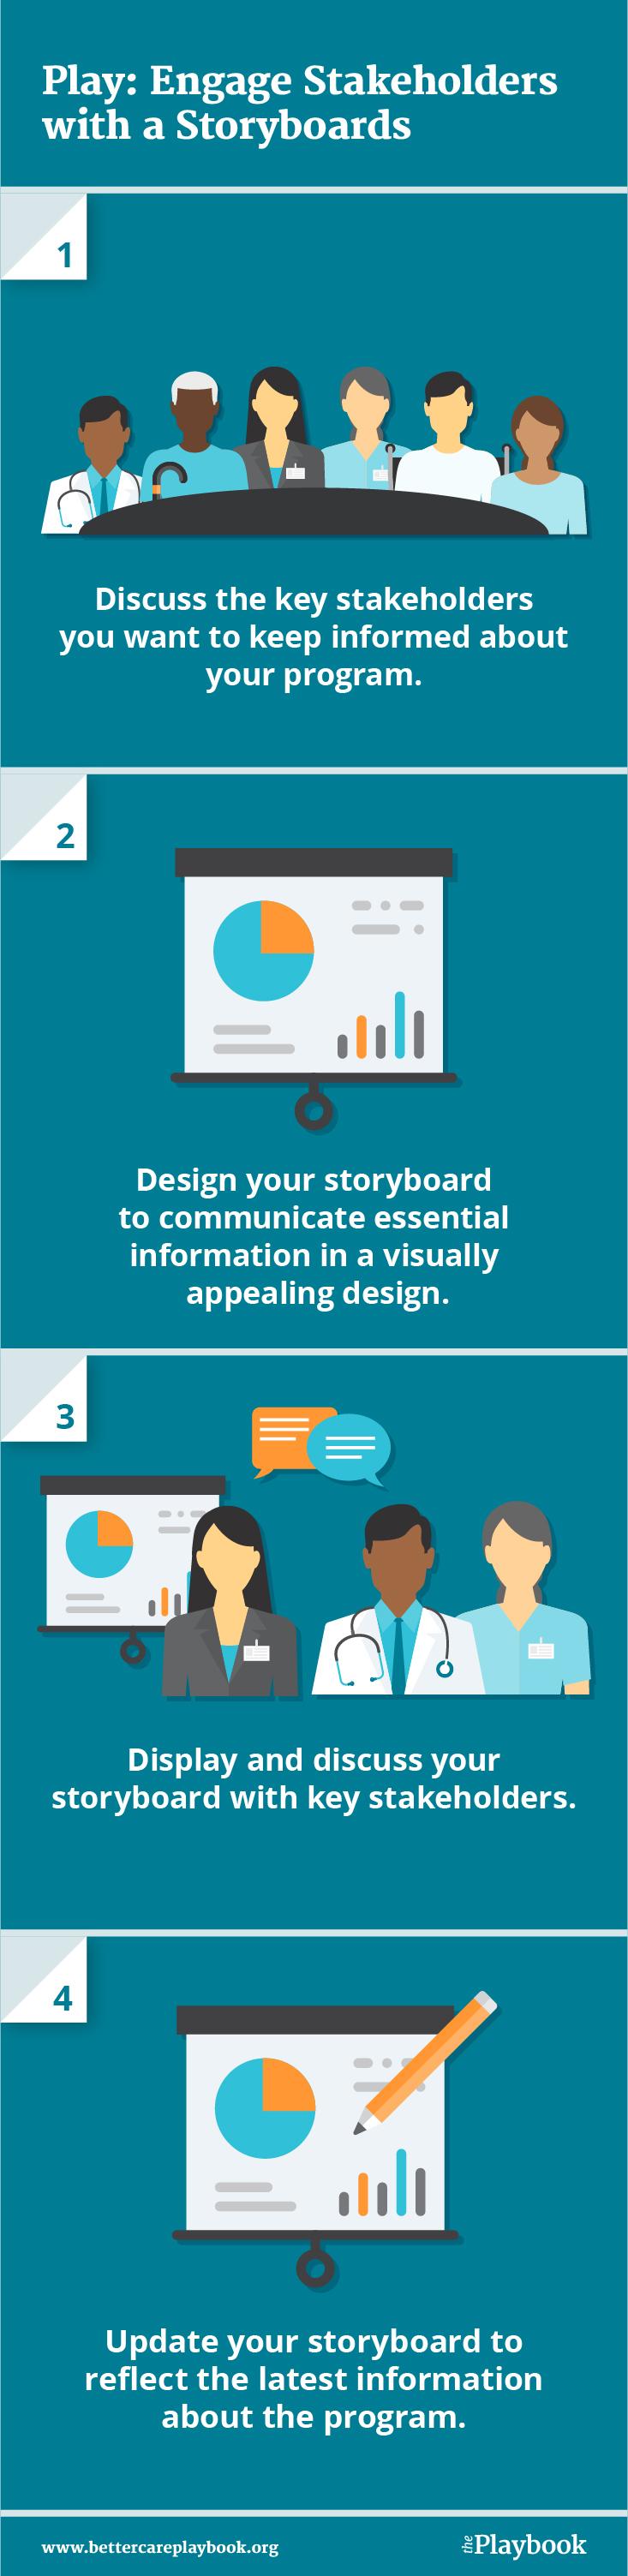 Play: Engage Stakeholders with a Storyboard mobile